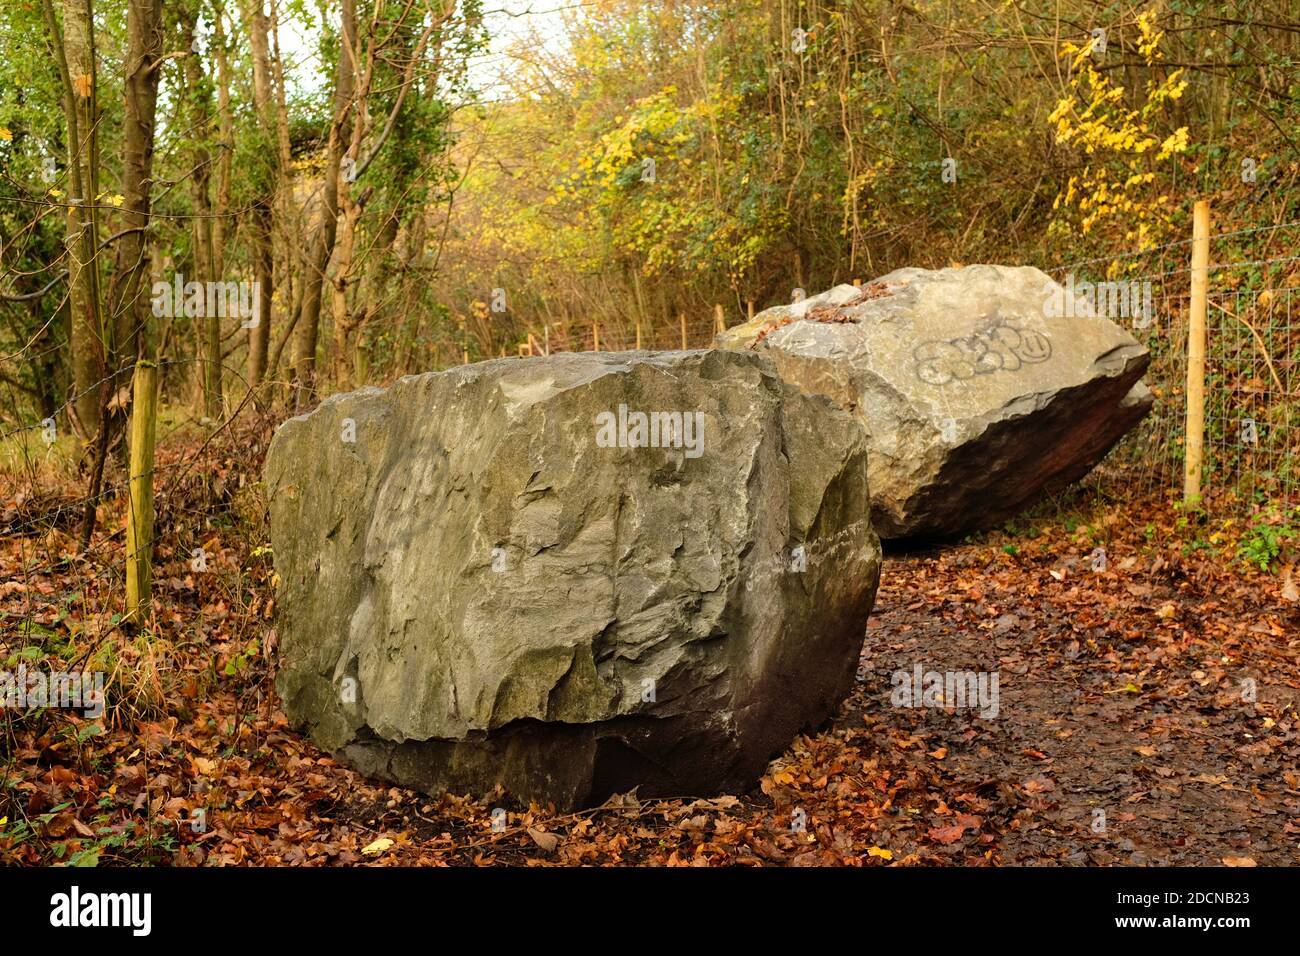 November 2020 - Large boulders placed in a country lane to prevent 4x4 off roaders using it and destroying the delicate local environment Stock Photo